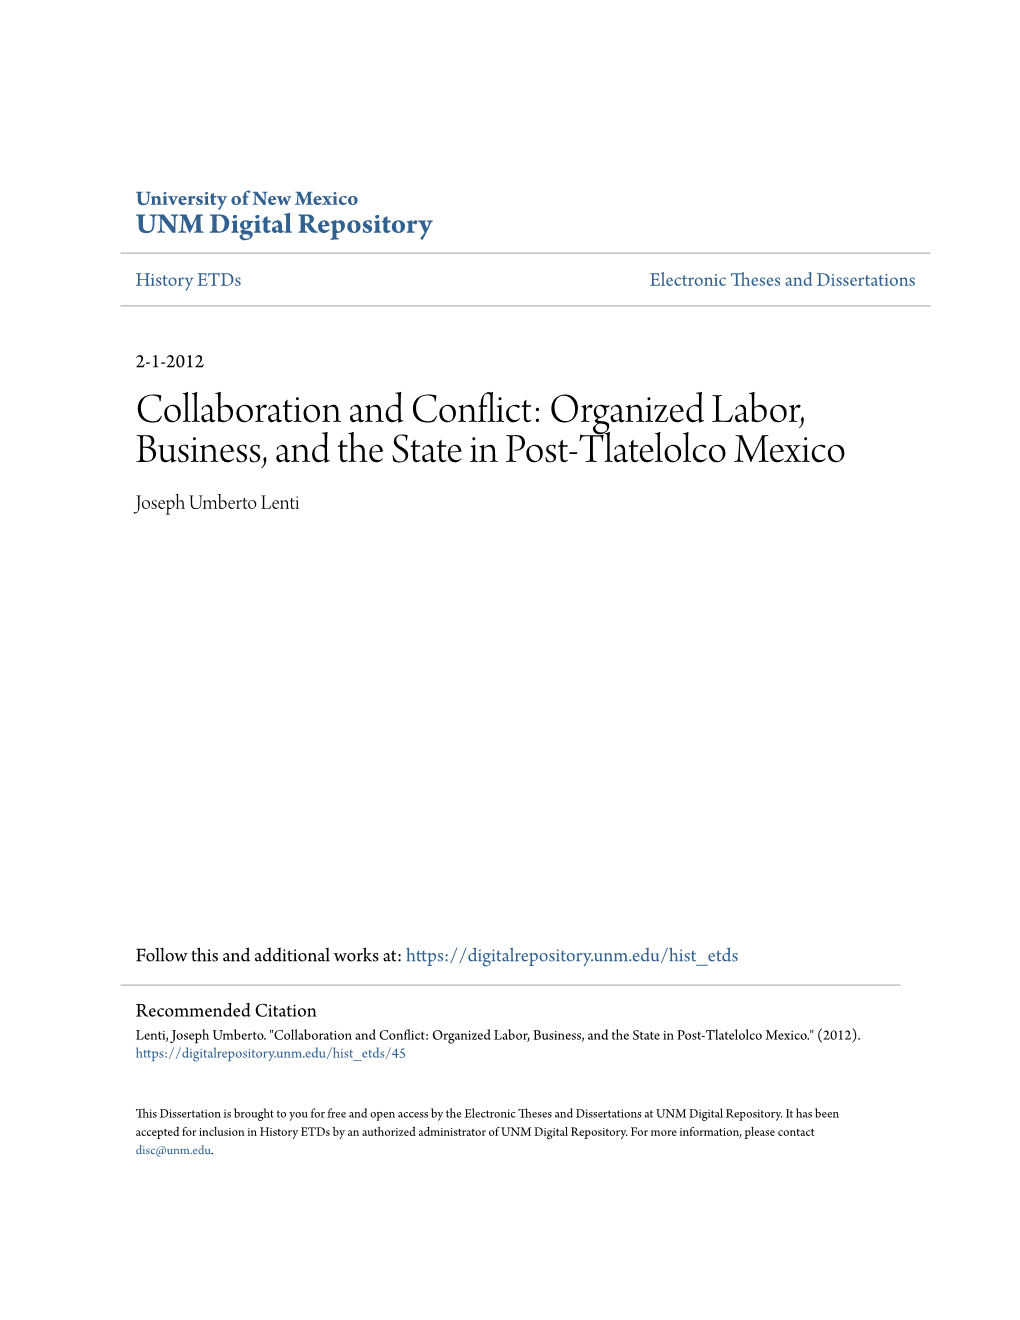 Organized Labor, Business, and the State in Post-Tlatelolco Mexico Joseph Umberto Lenti